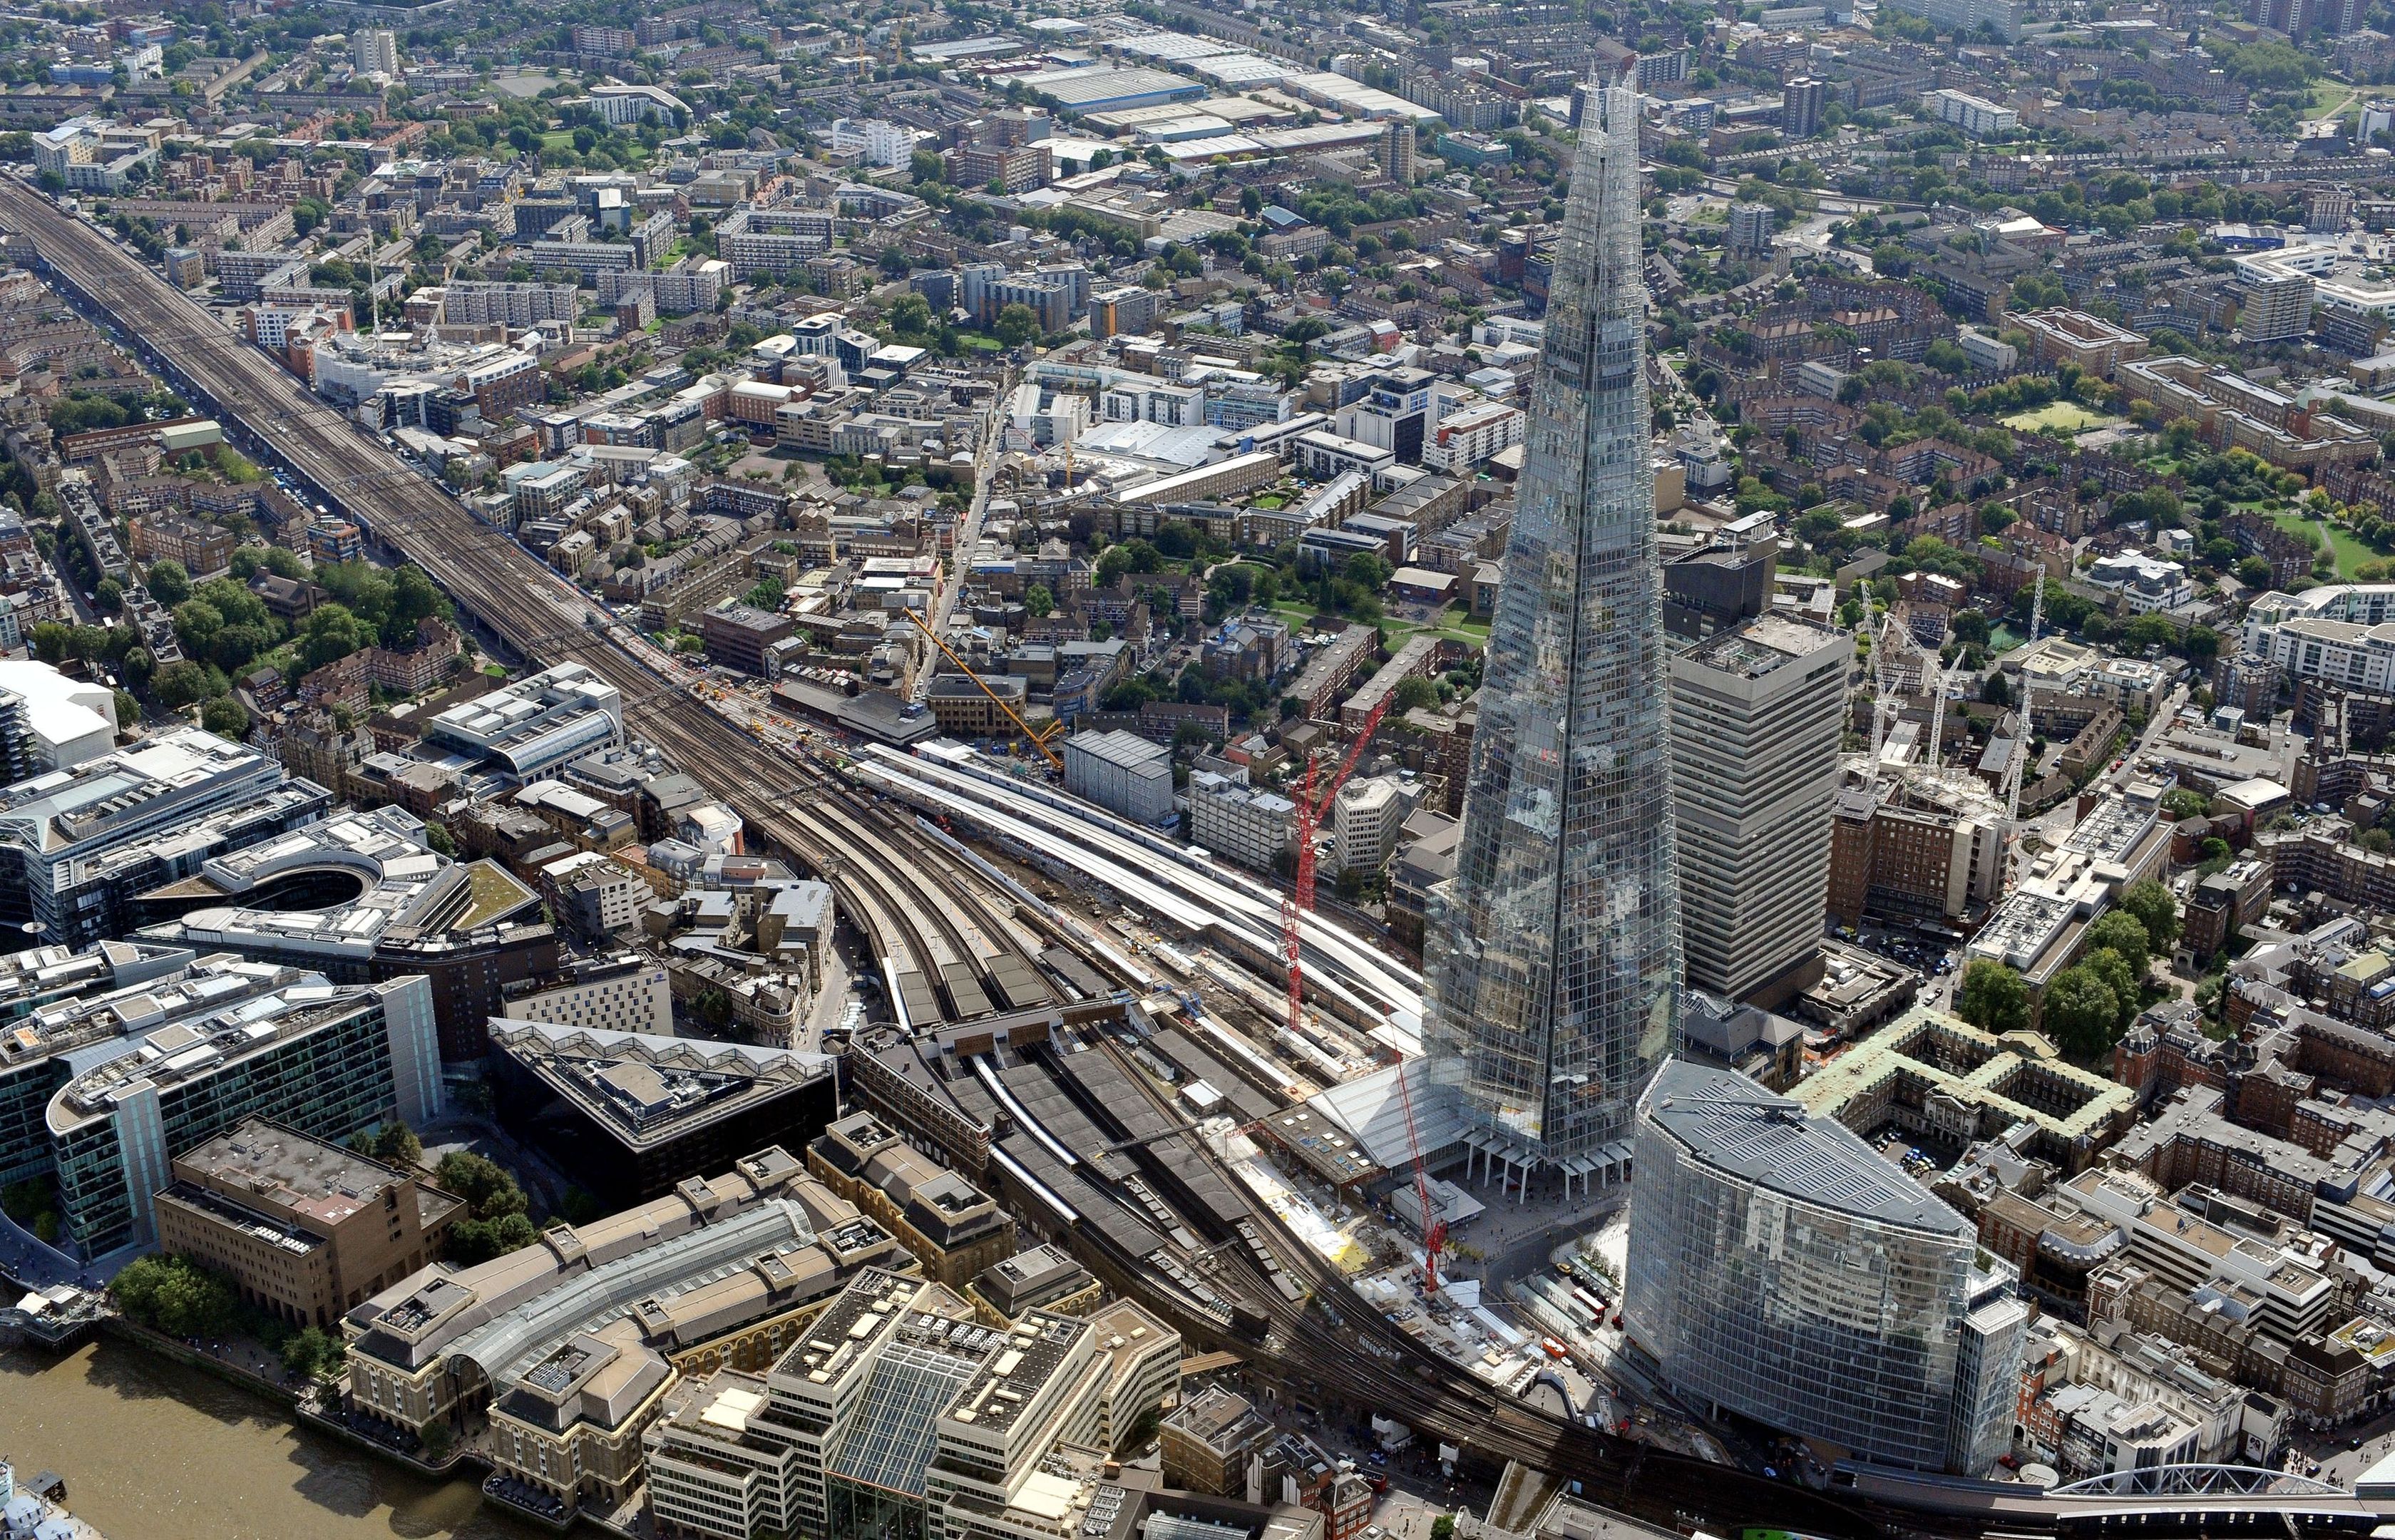 The Shard was said to be one of the intended targets.